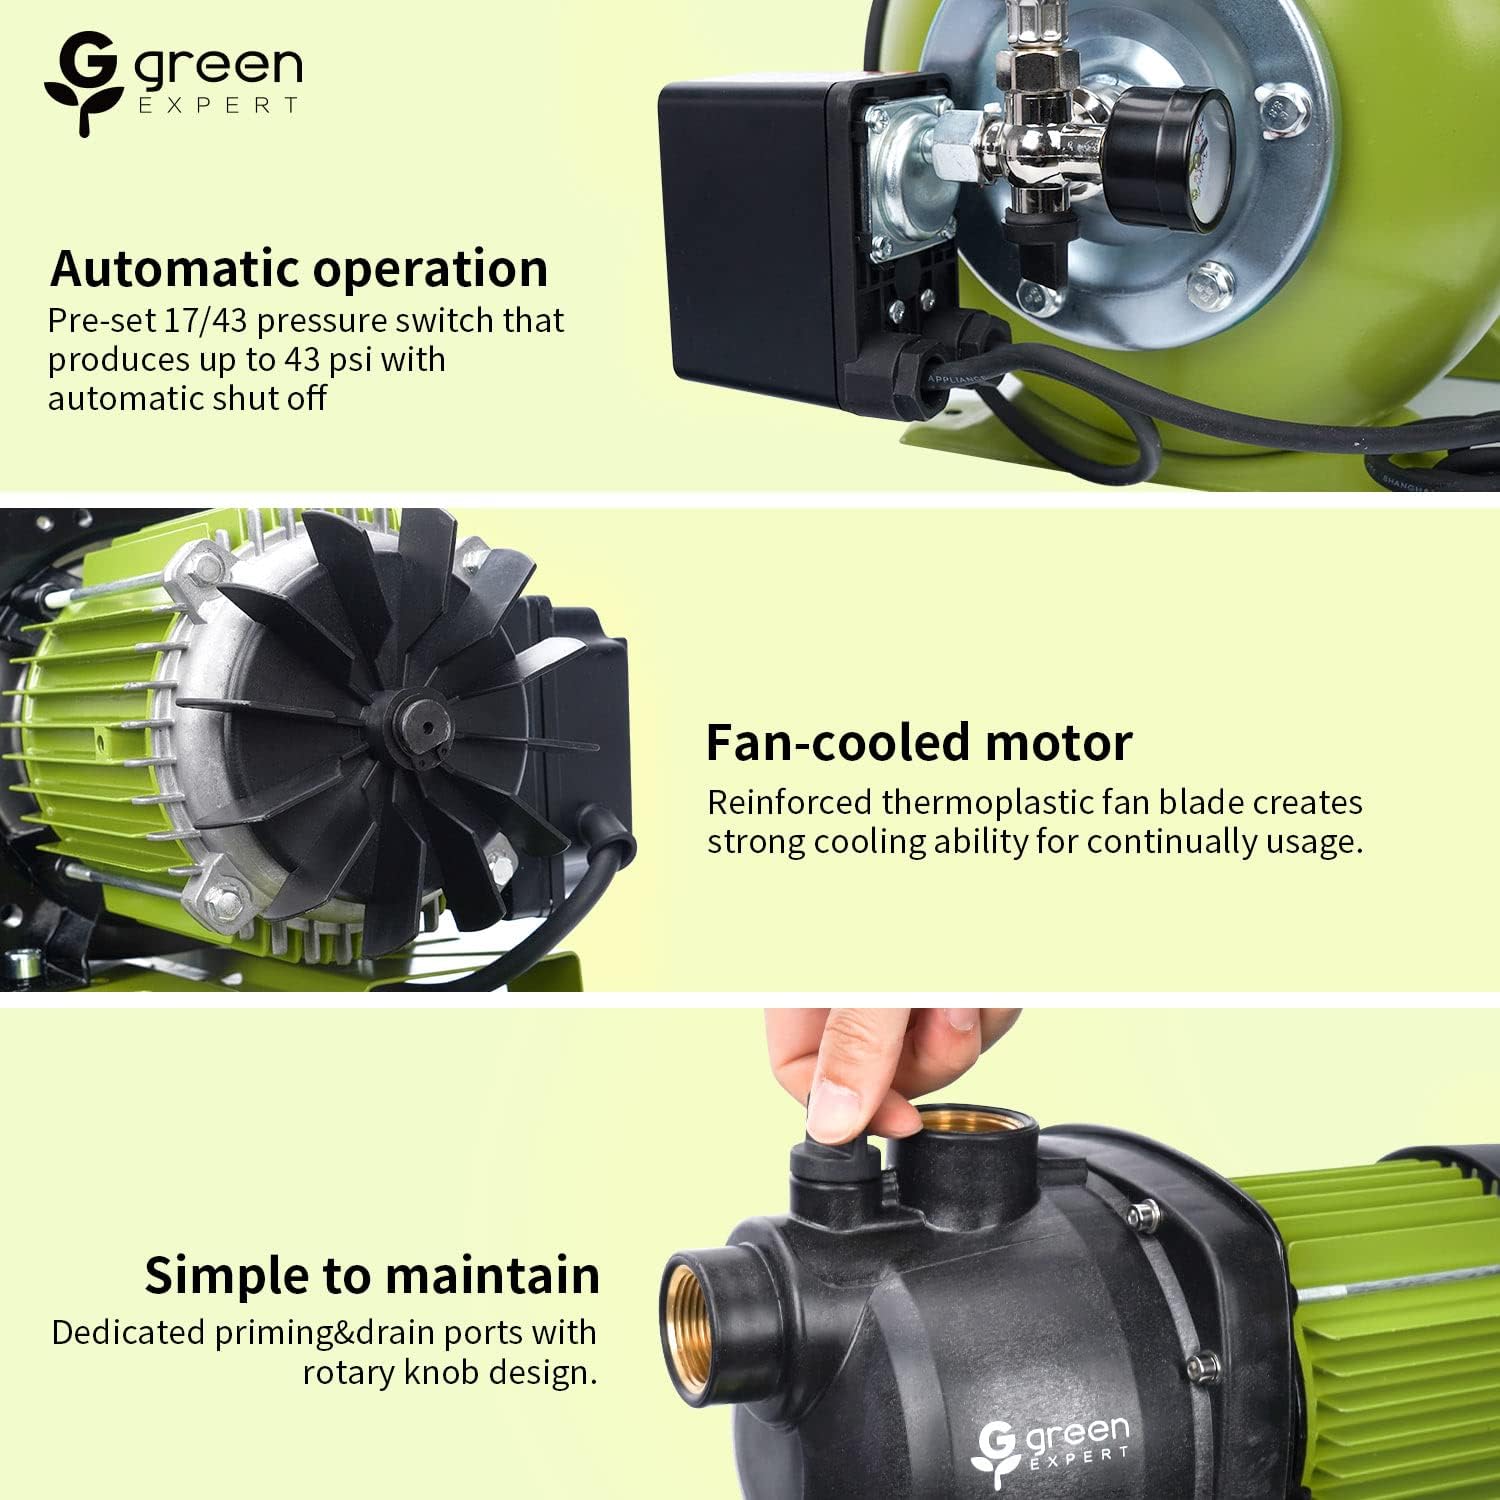 Green Expert 1HP Shallow Well Water Pump Max Head 130FT Max Flow 800GPH 5-Gal Pressure Tank Automatic Booster System 17-43 PSI Preset Switch for Household Pipe Pressurization Lawn Garden Irrigation